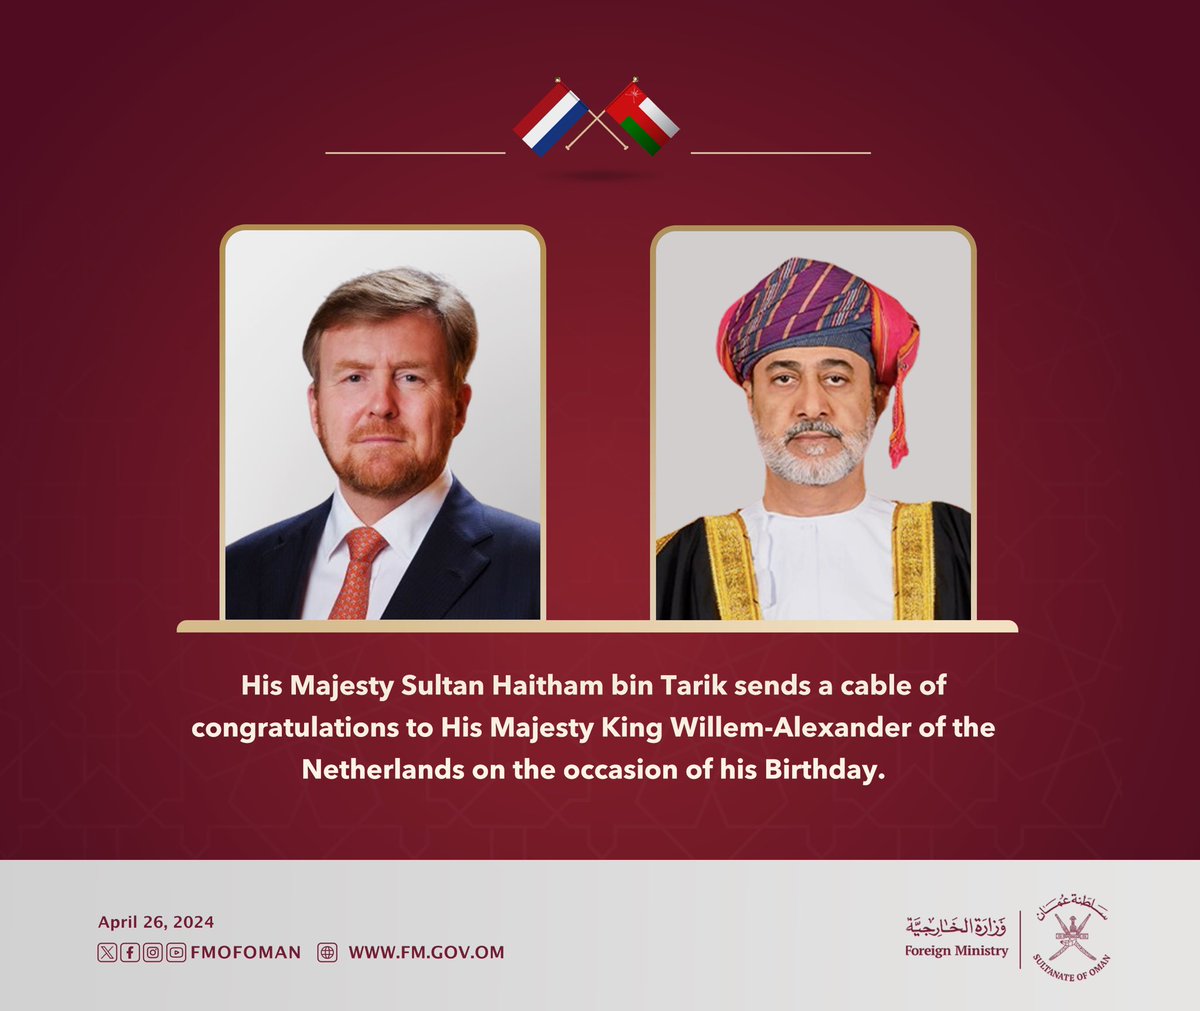 His Majesty the Sultan sends a cable of congratulations to His Majesty King Willem-Alexander of the #Netherlands on the occasion of his Birthday.